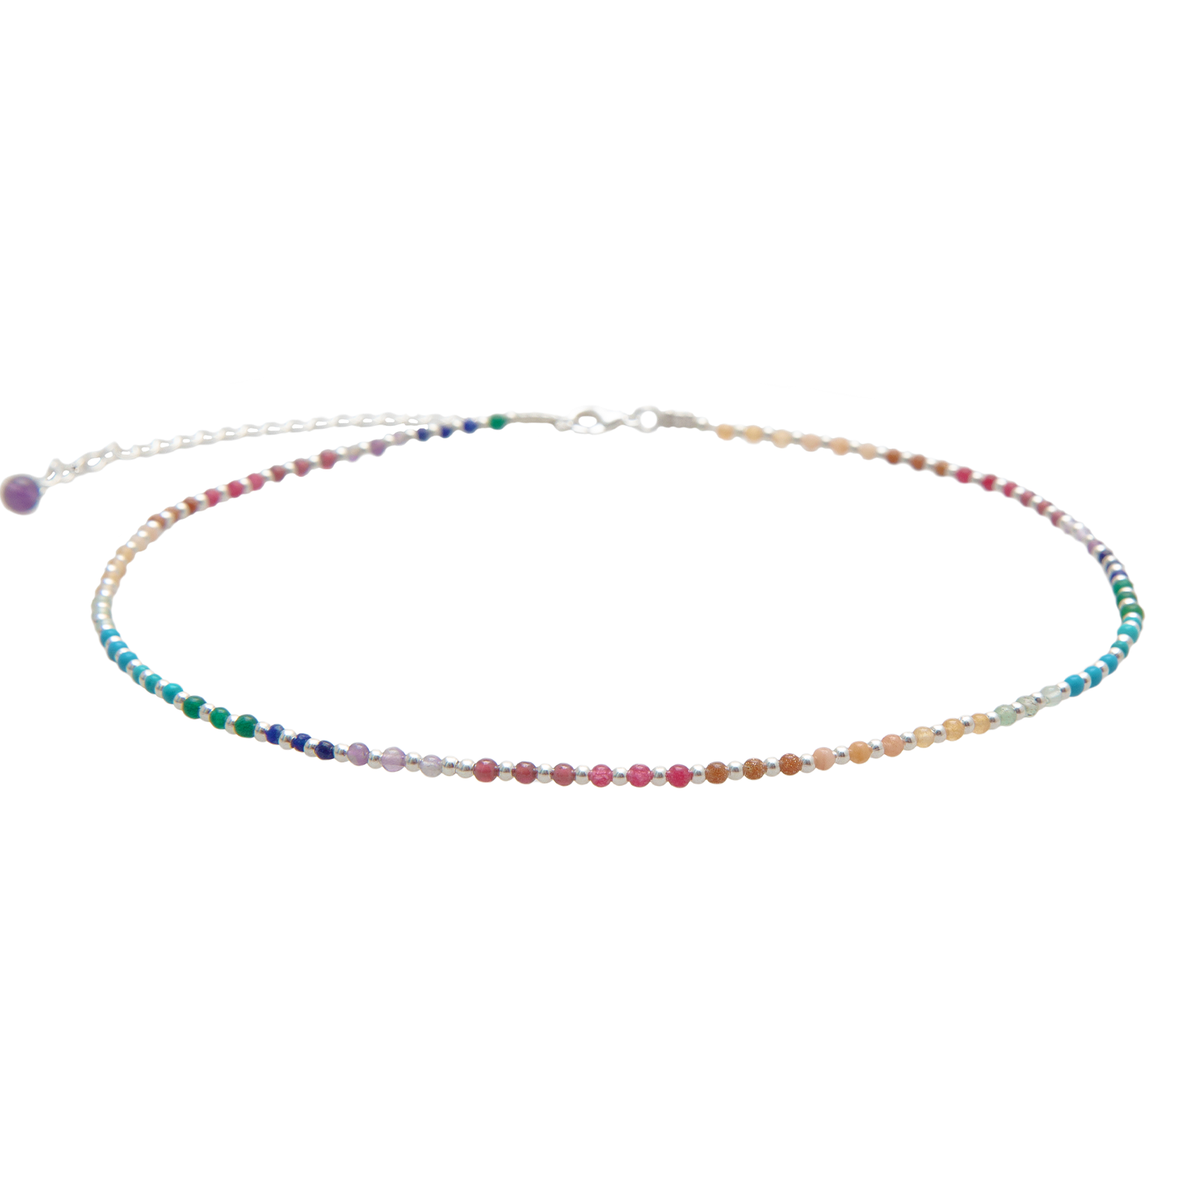 2mm multicolor stone and silver bead healing necklace with a silver chain